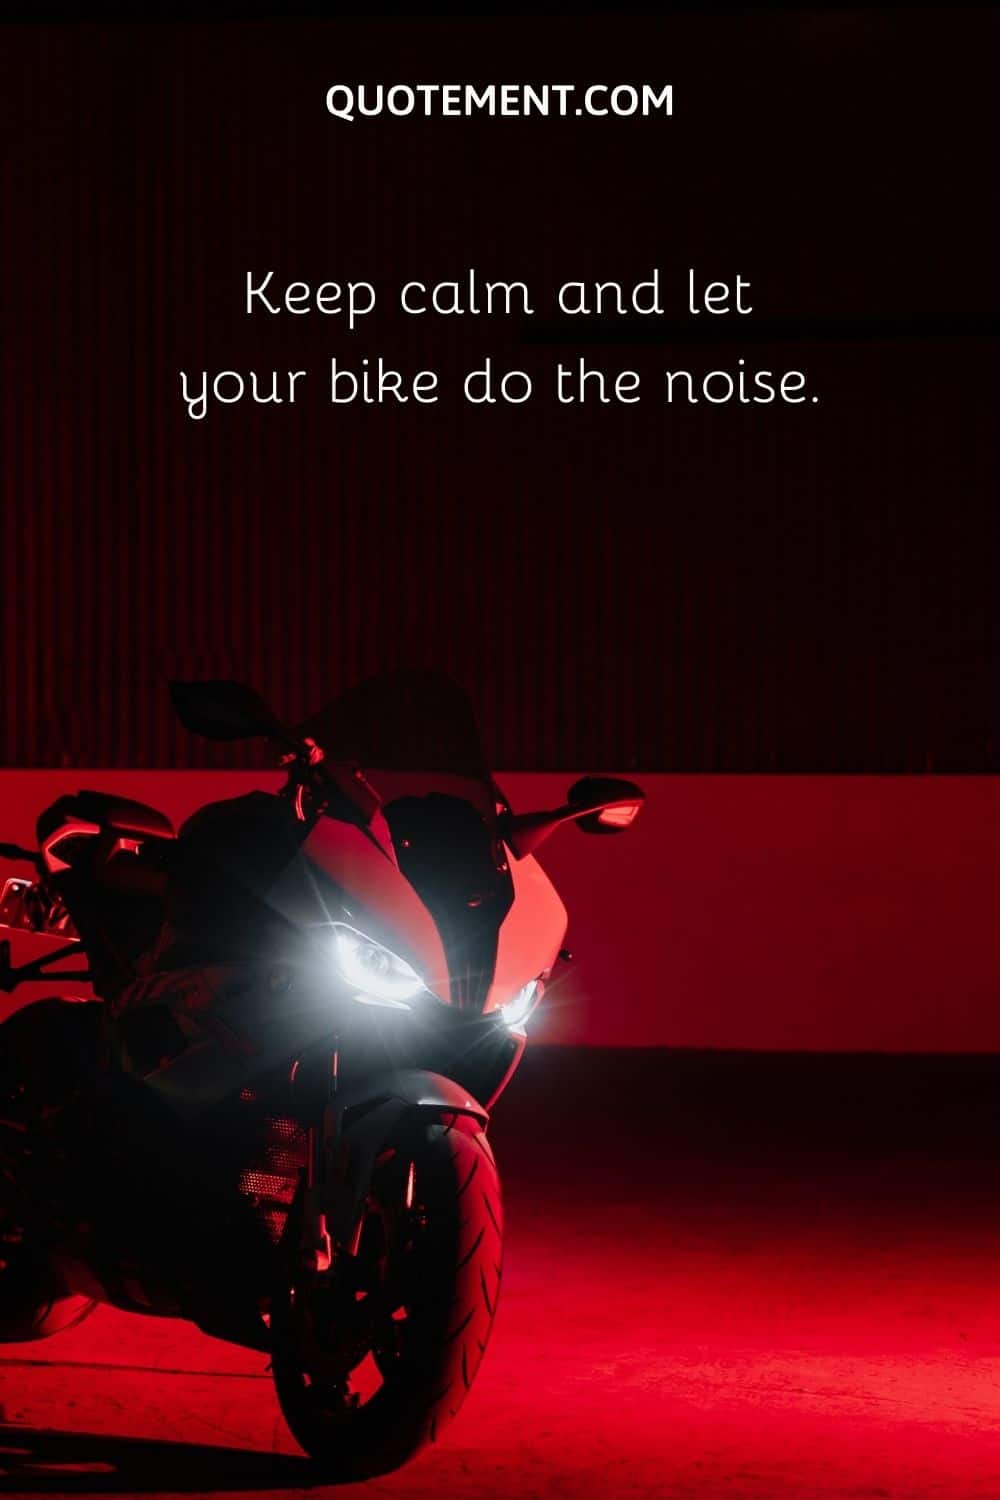 Keep calm and let your bike do the noise.